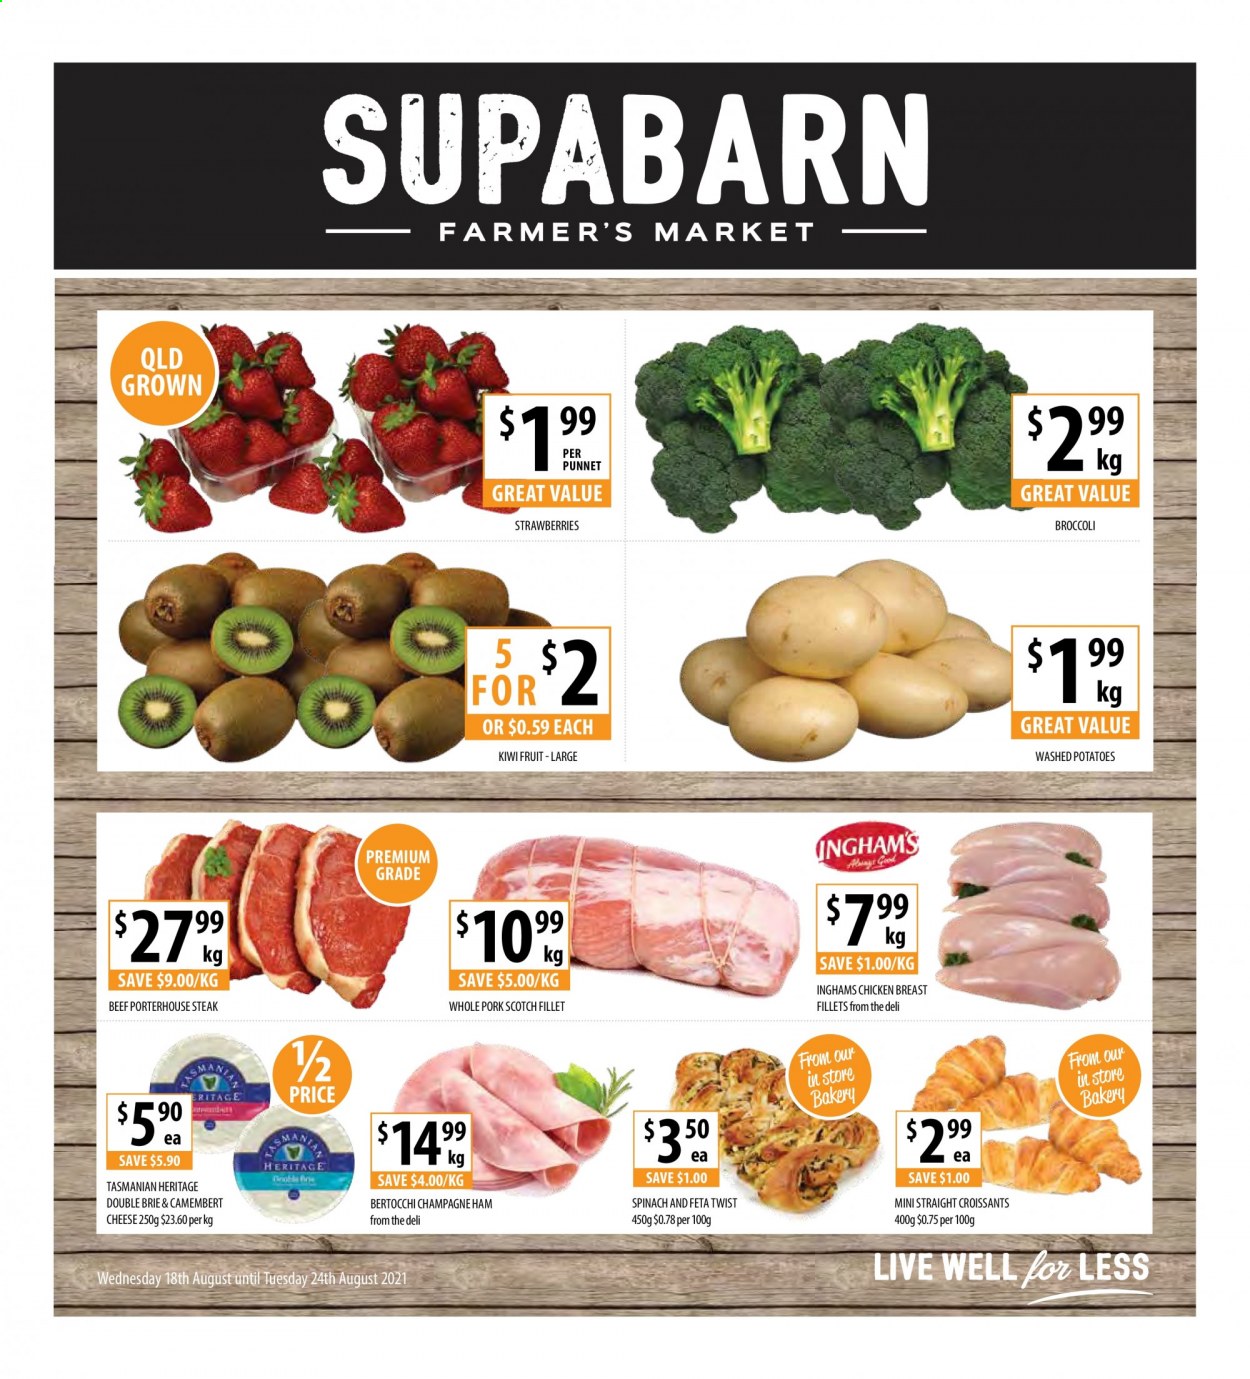 thumbnail - Supabarn Catalogue - 18 Aug 2021 - 24 Aug 2021 - Sales products - croissant, broccoli, spinach, potatoes, kiwi, strawberries, ham, camembert, cheese, brie, Tasmanian Heritage, feta, L'Or, champagne, chicken breasts, steak. Page 1.